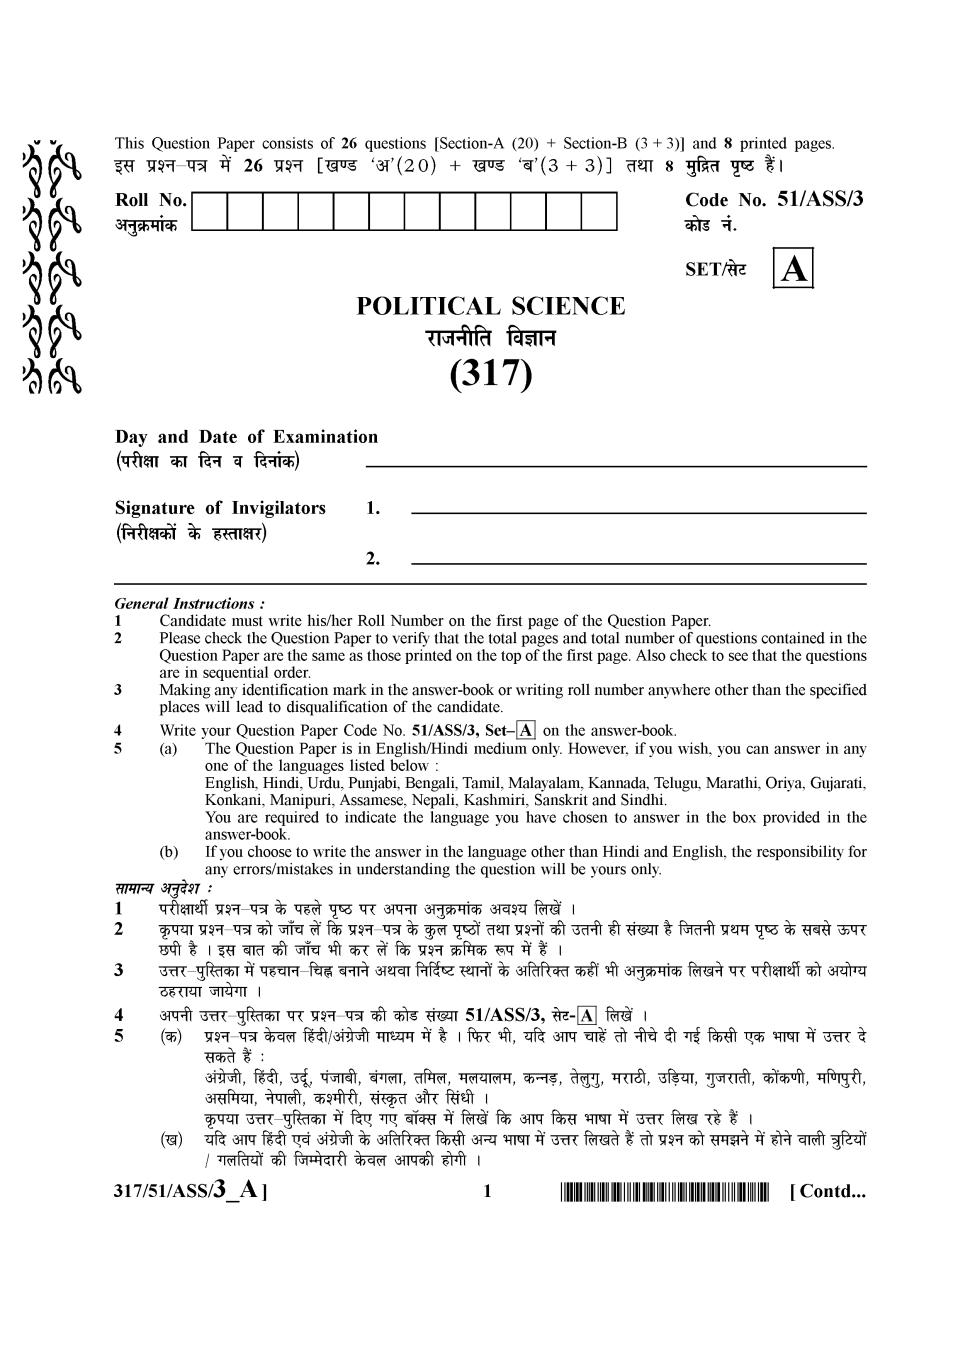 NIOS Class 12 Question Paper Oct 2015 - Political Science - Page 1